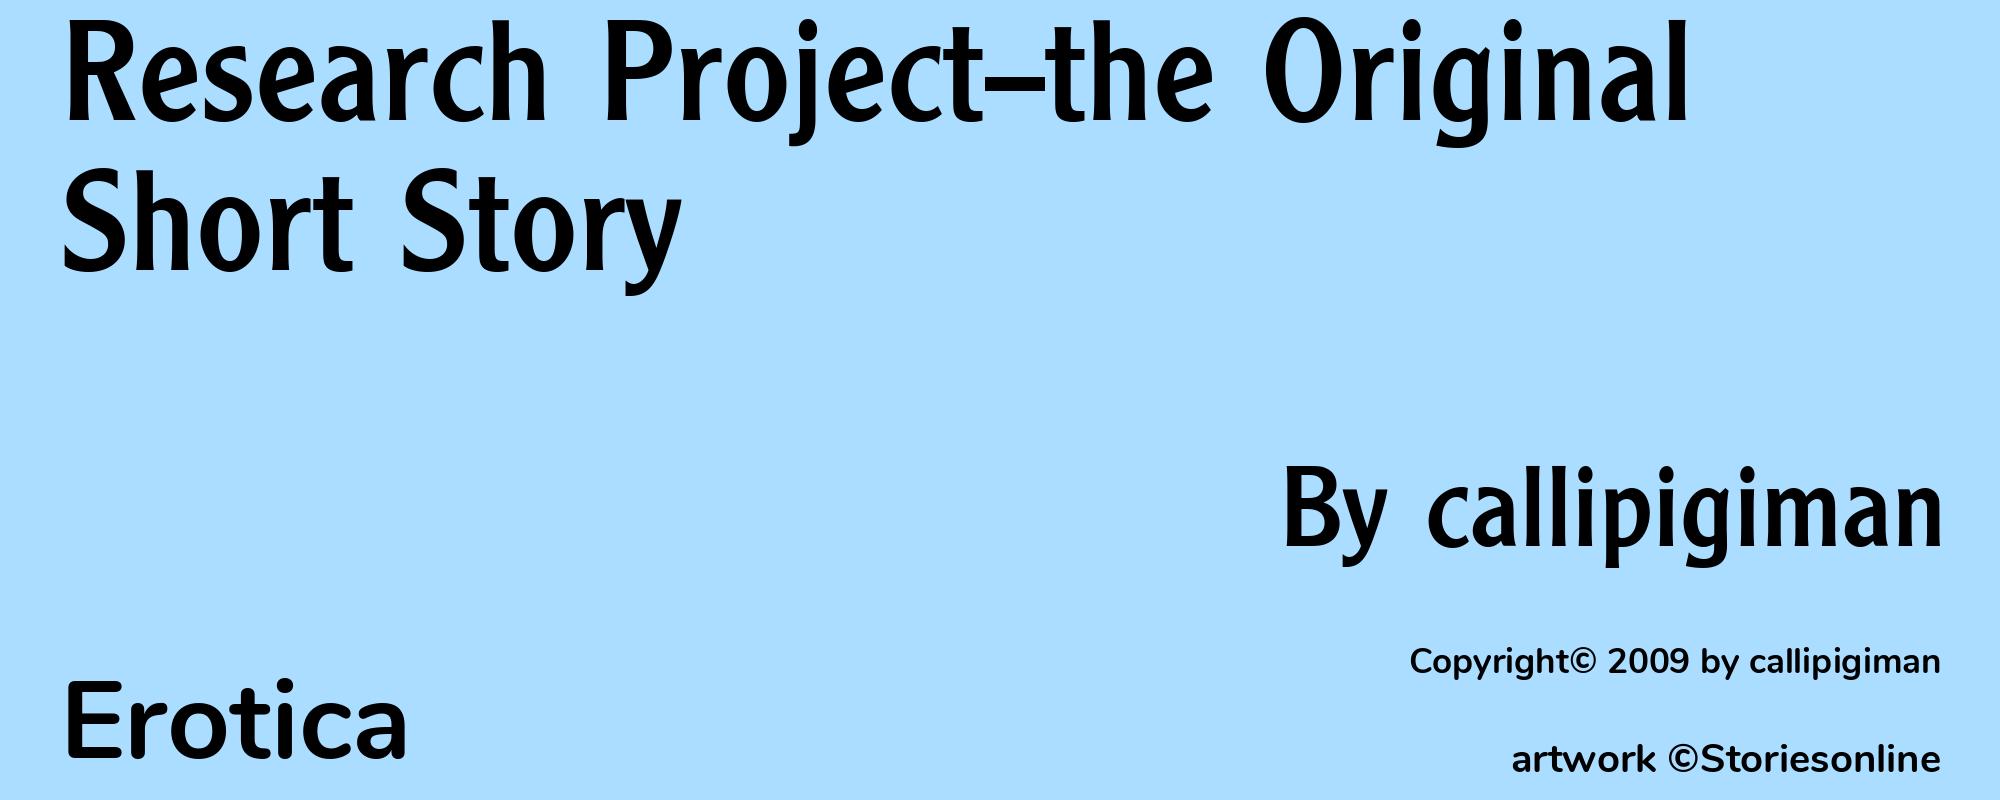 Research Project--the Original Short Story - Cover